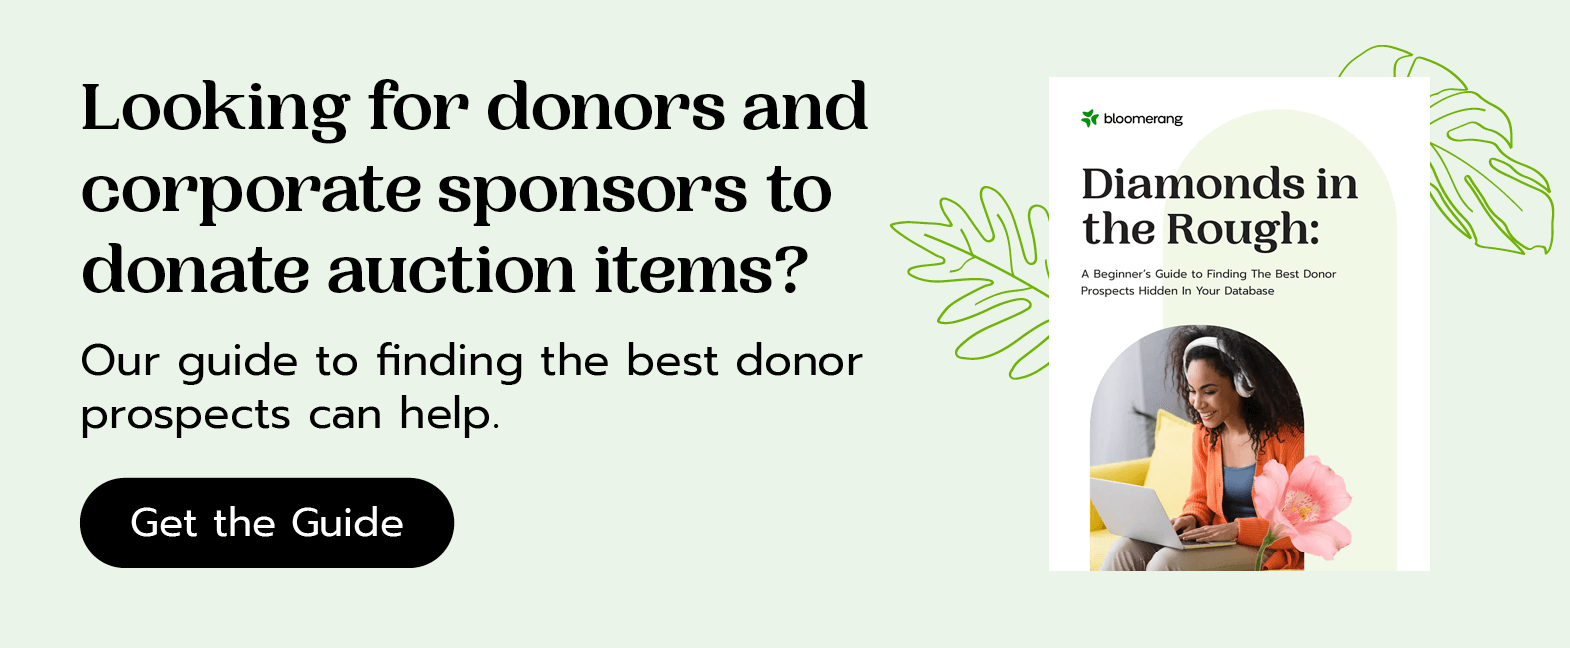 Looking for donors and corporate sponsors to donate auction items? Our guide to finding the best hidden prospects can help. Get the guide here.